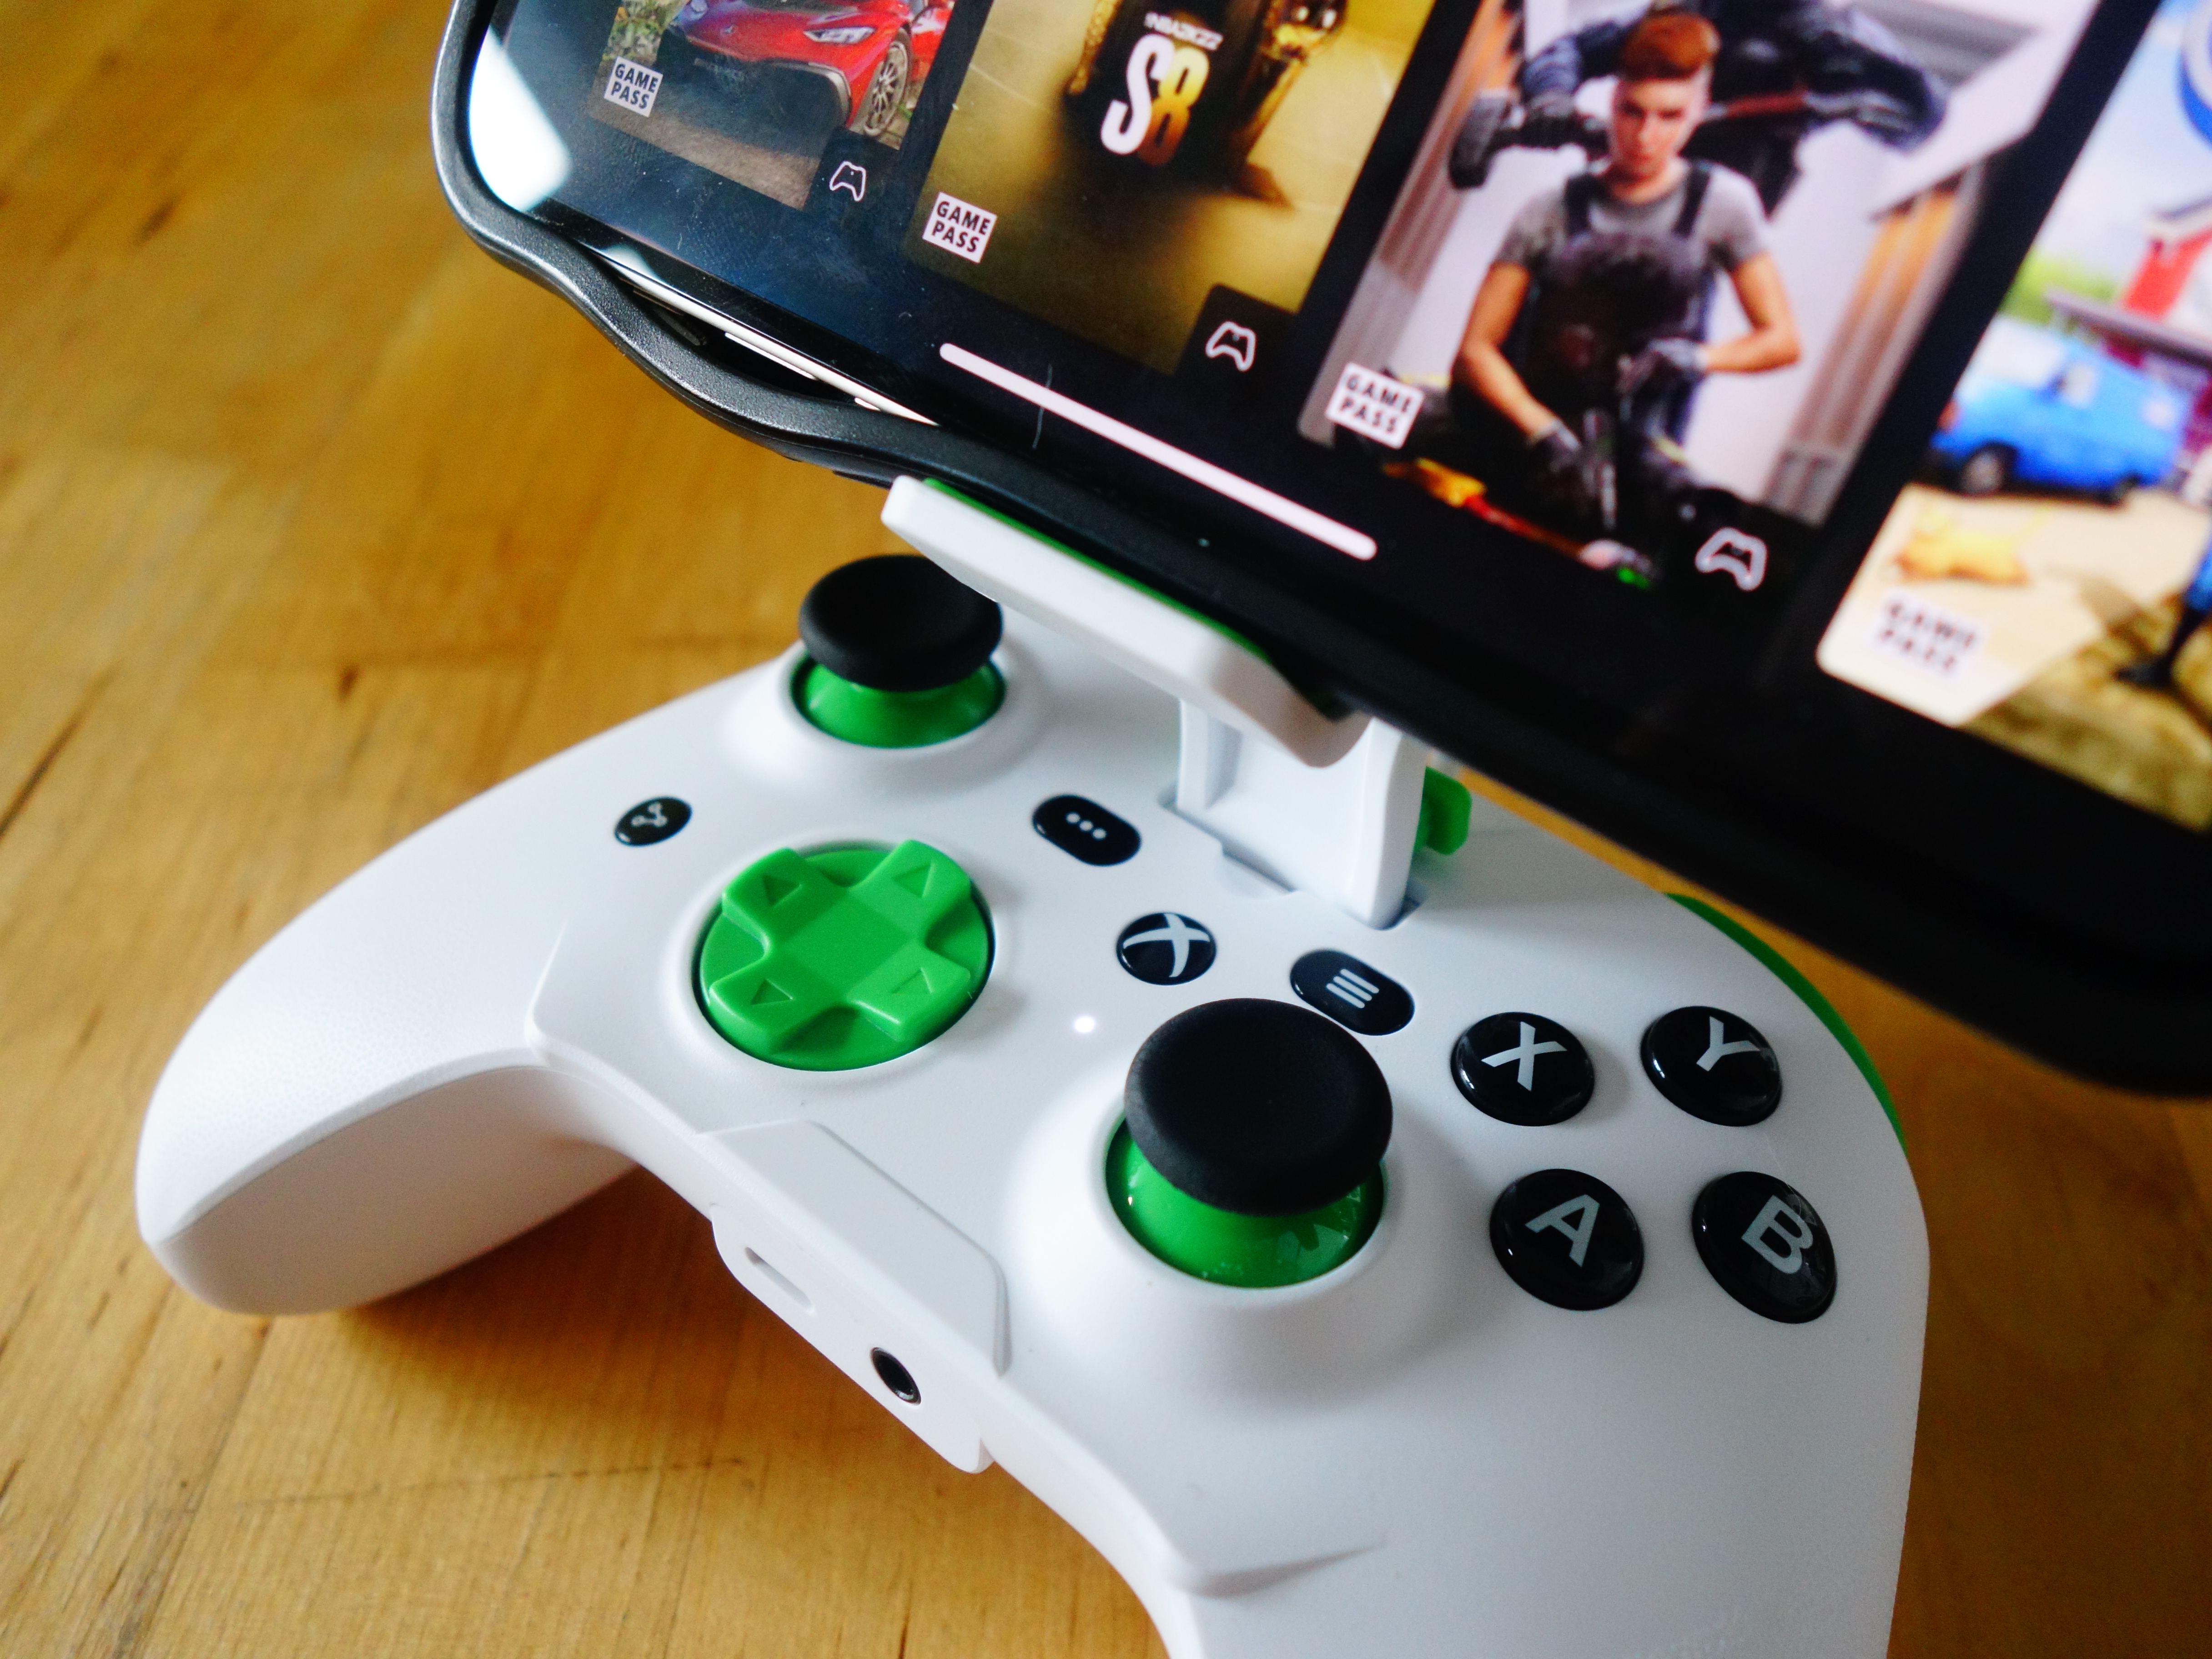 RiotPWR Xbox cloud gaming controller review: You can do better